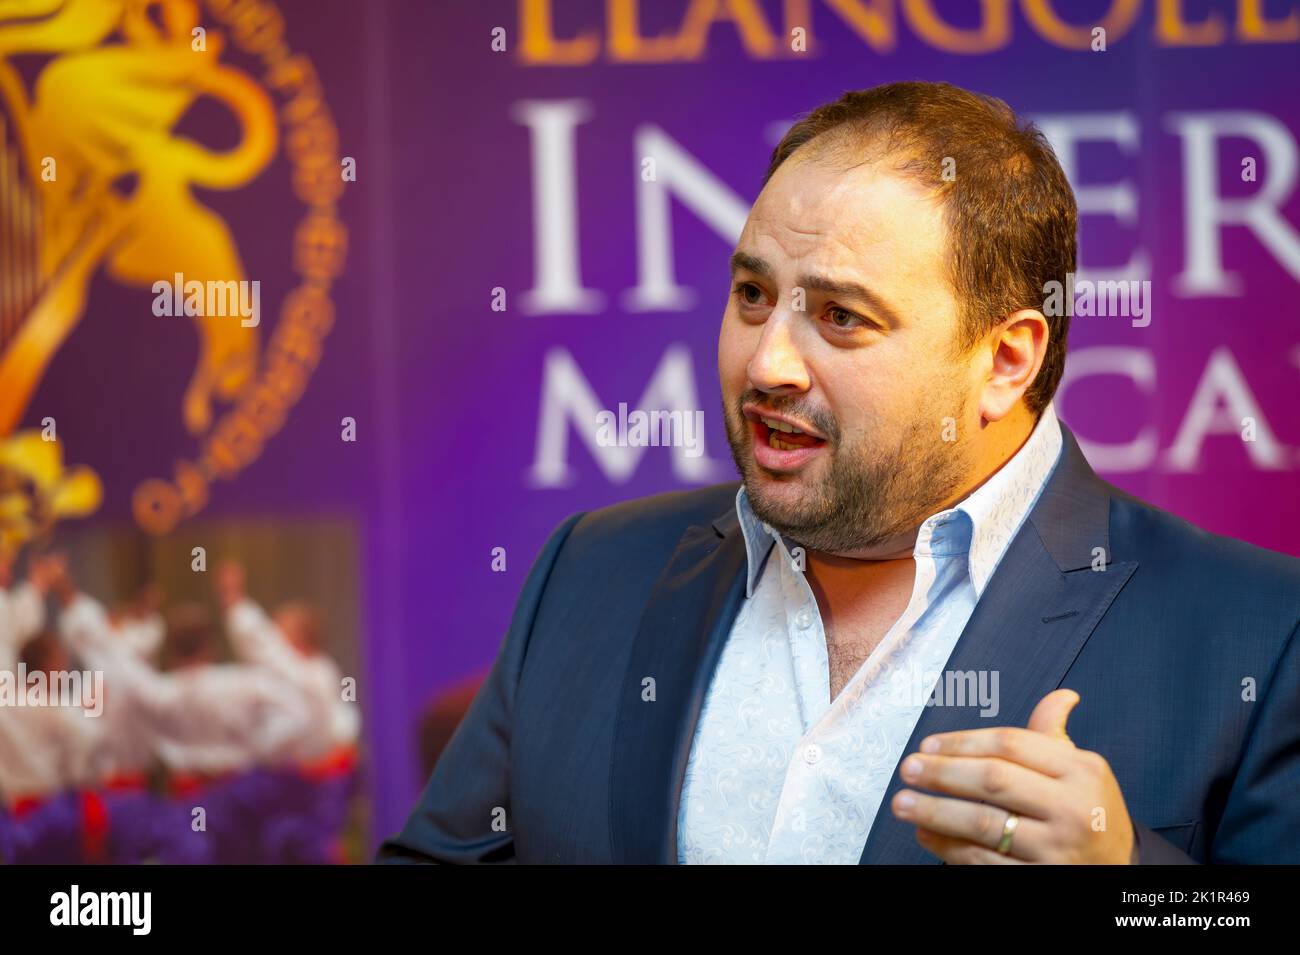 Welsh opera singer, Wynne Evans, (of Go Compare fame), visiting the Llangollen International Musical Eisteddfod, in Llangollen, North Wales, UK. Stock Photo